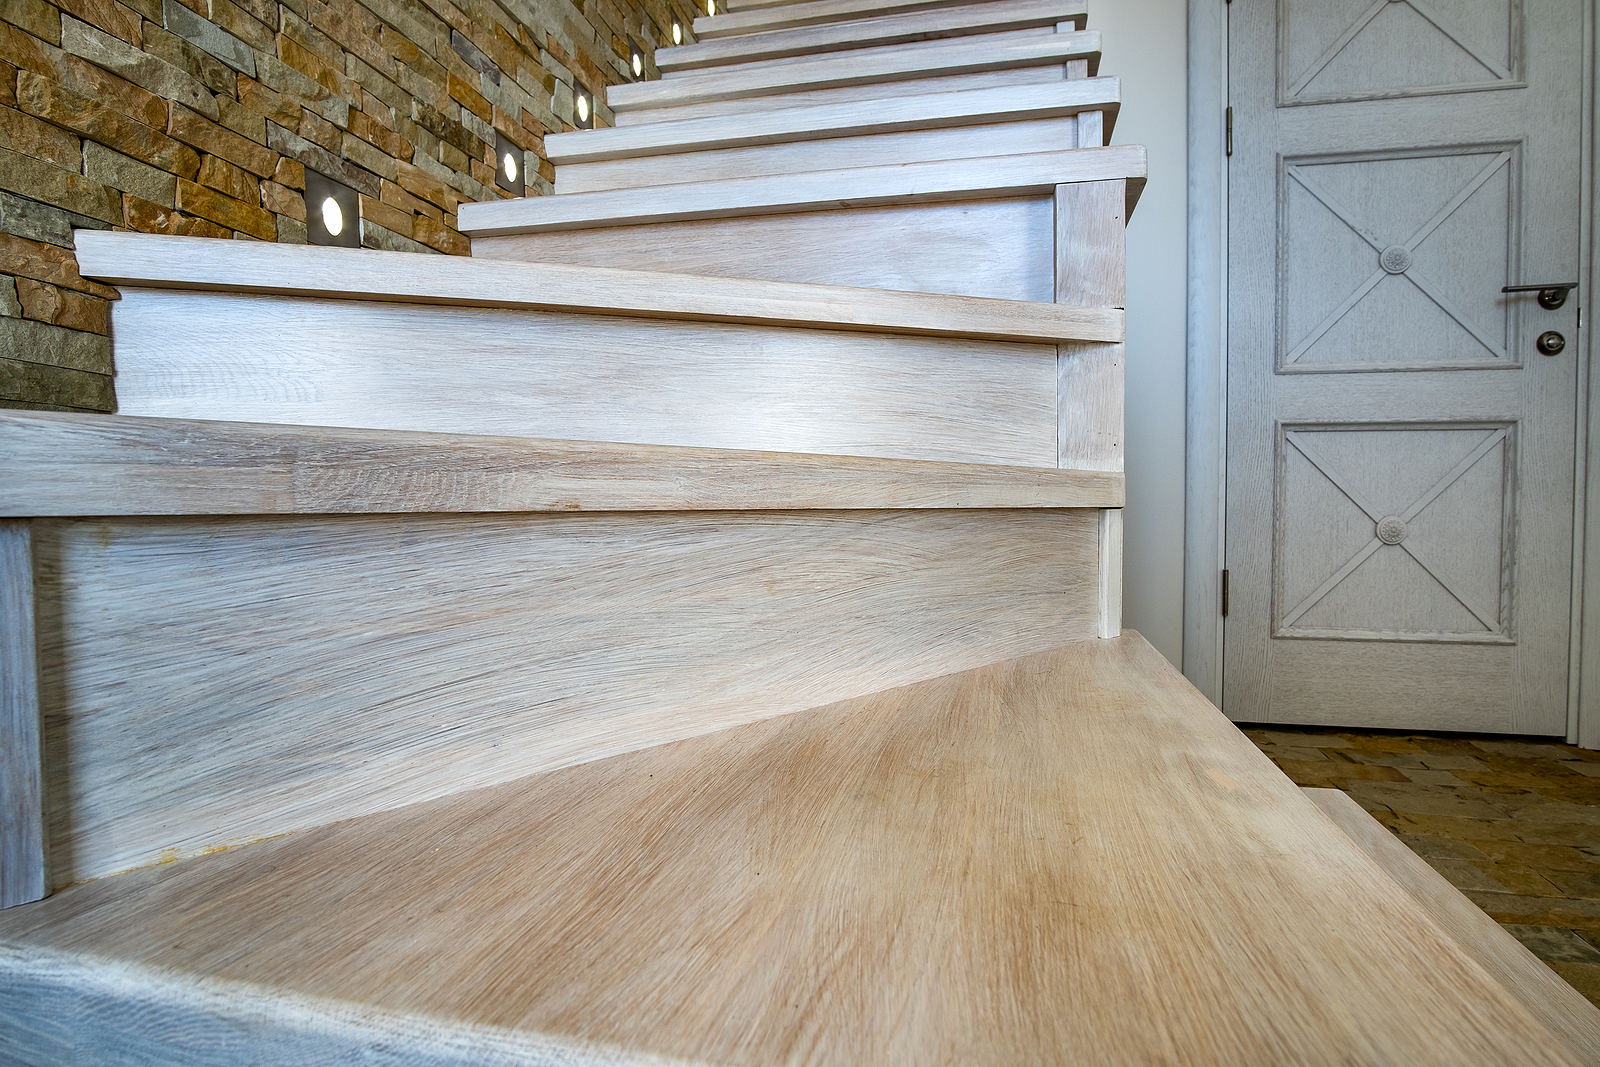 How to Varnish Oak Stairs